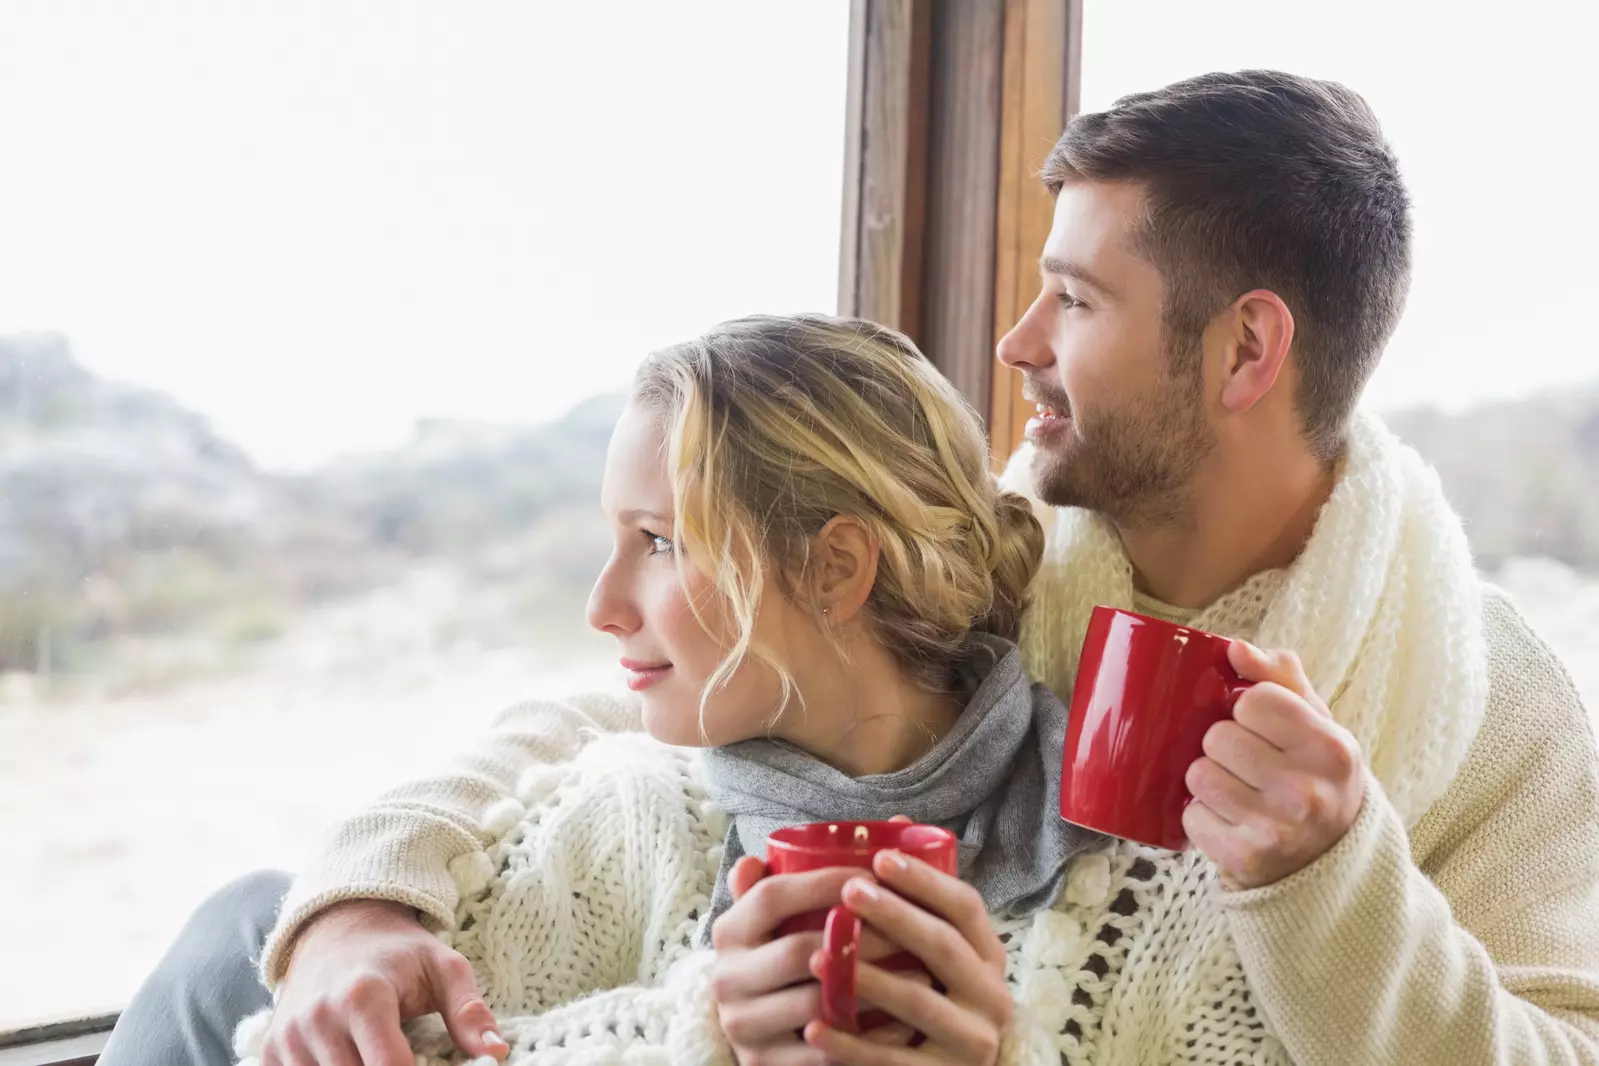 Couple enjoying a hot coffee by the window looking at the snow